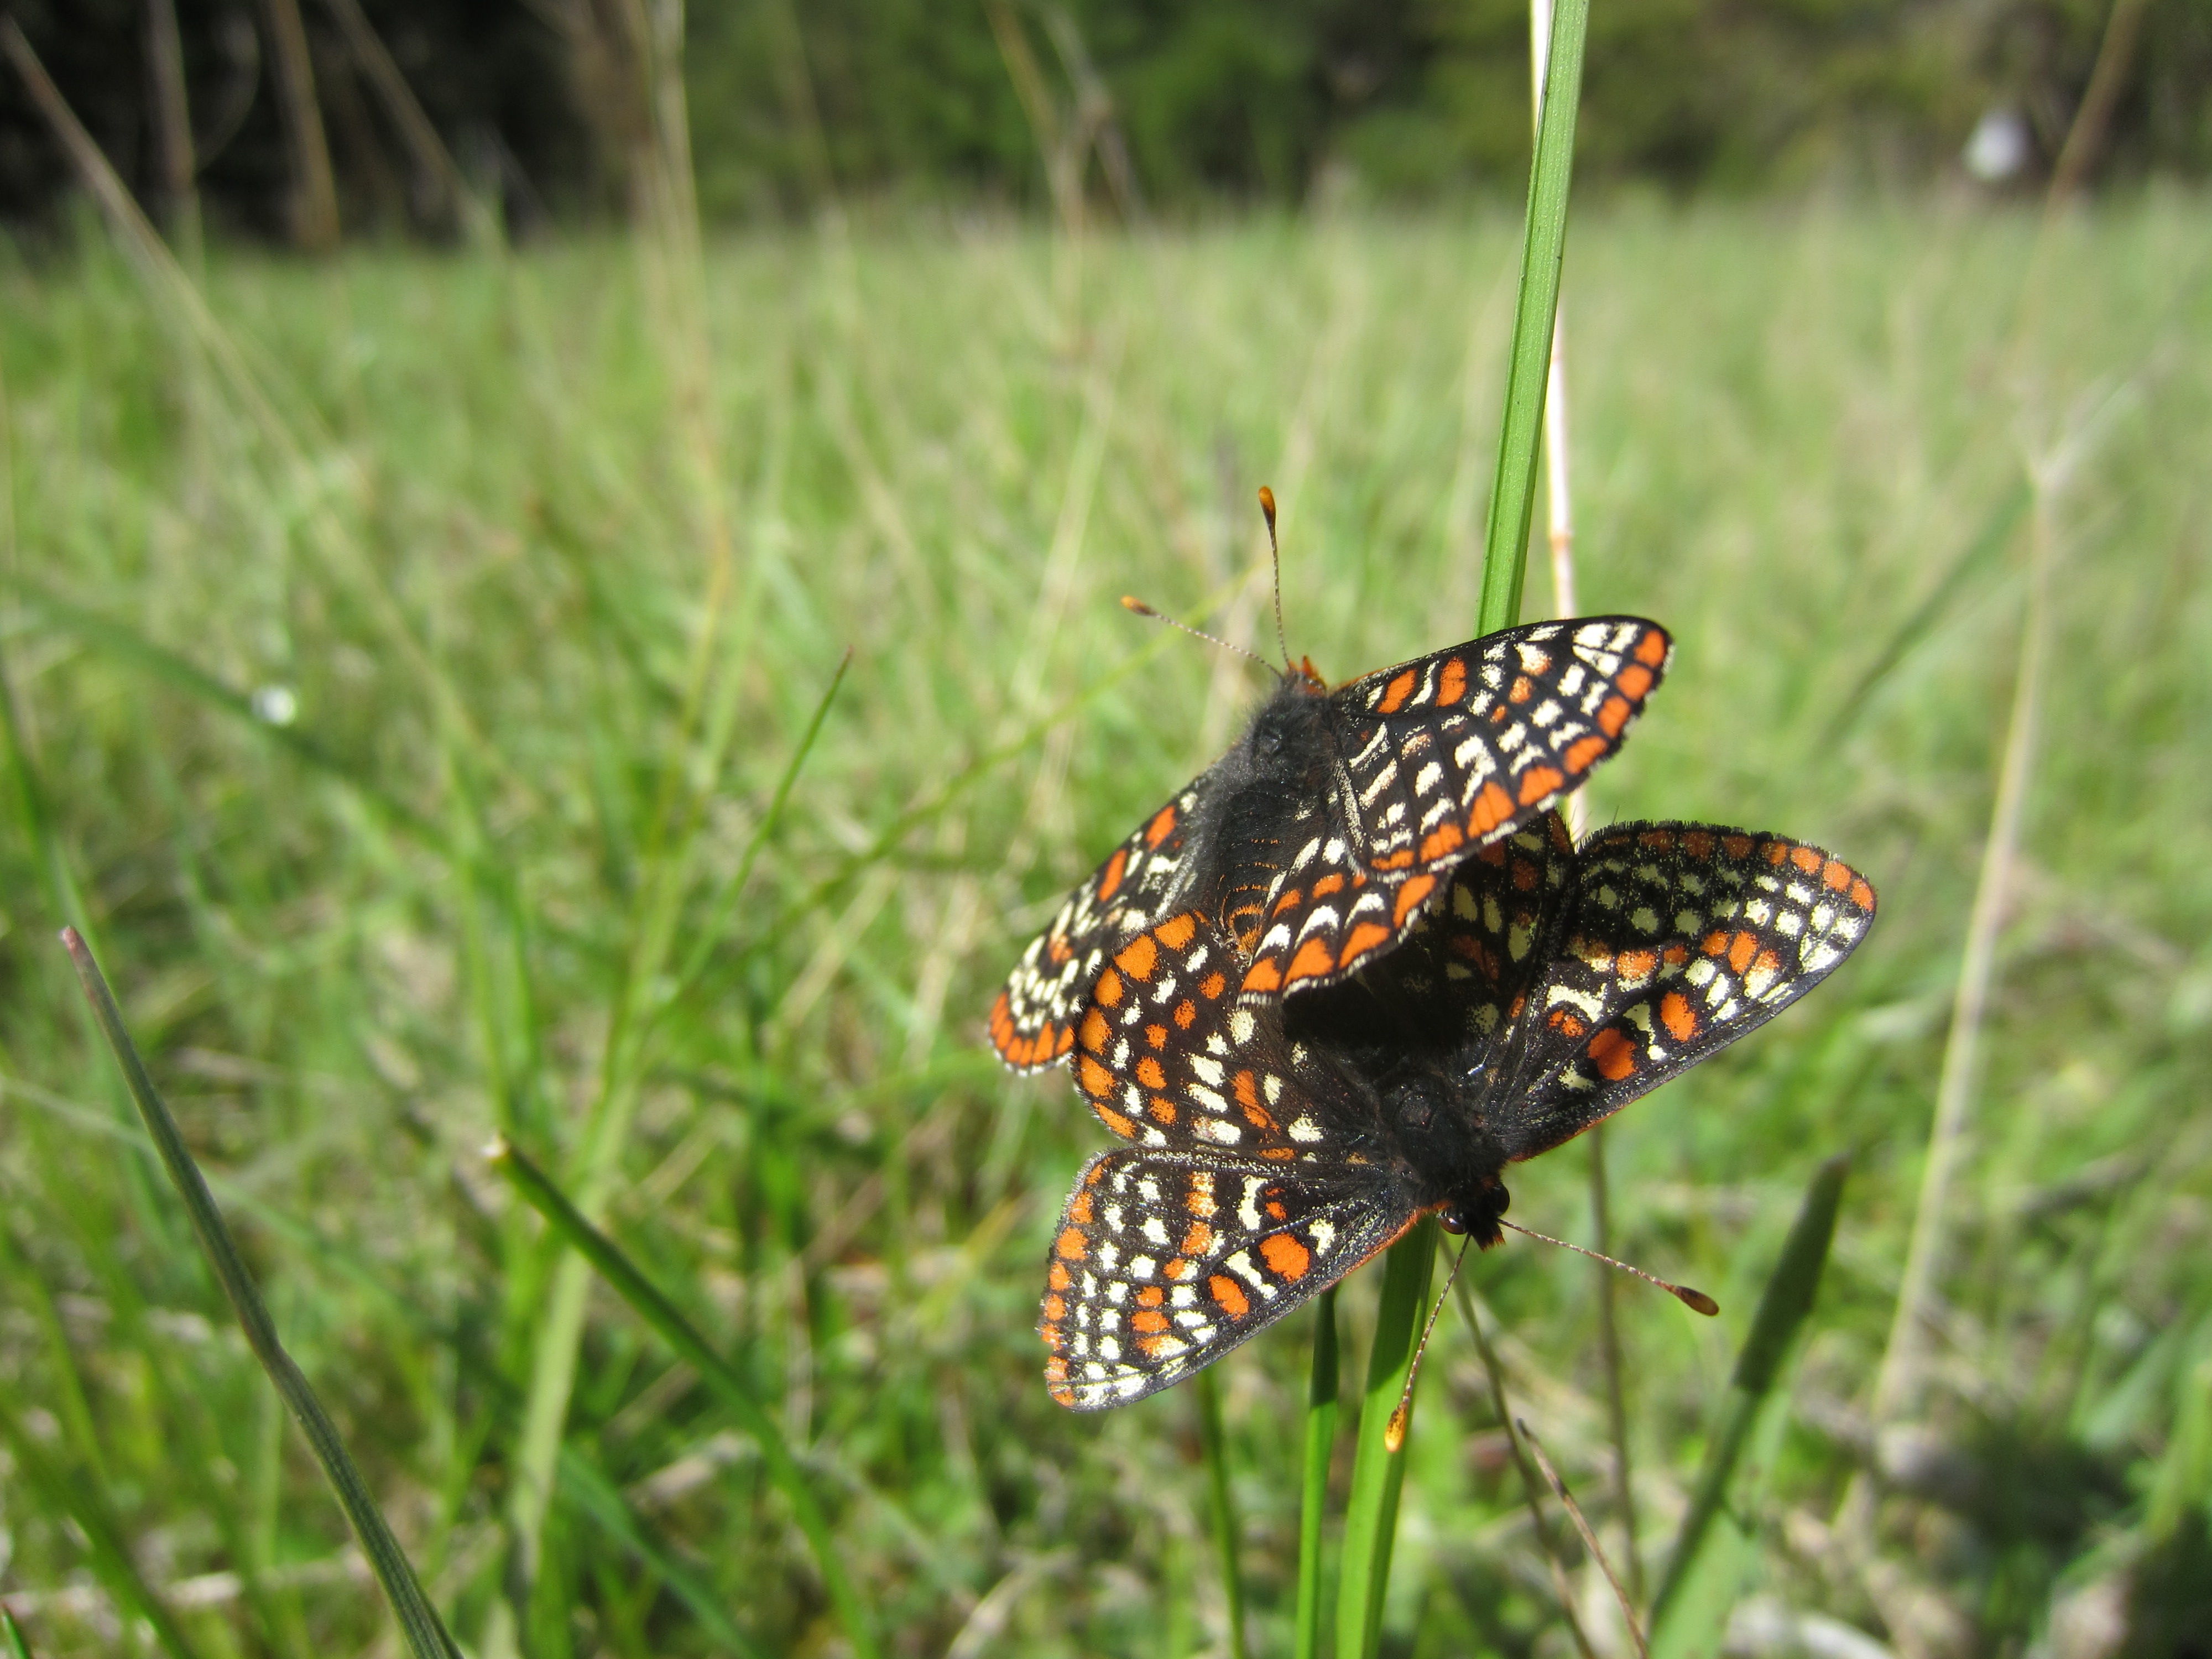 Two black-white-and-orange butterflies have landed on a long blade of grass and are shown with wings outstretched.